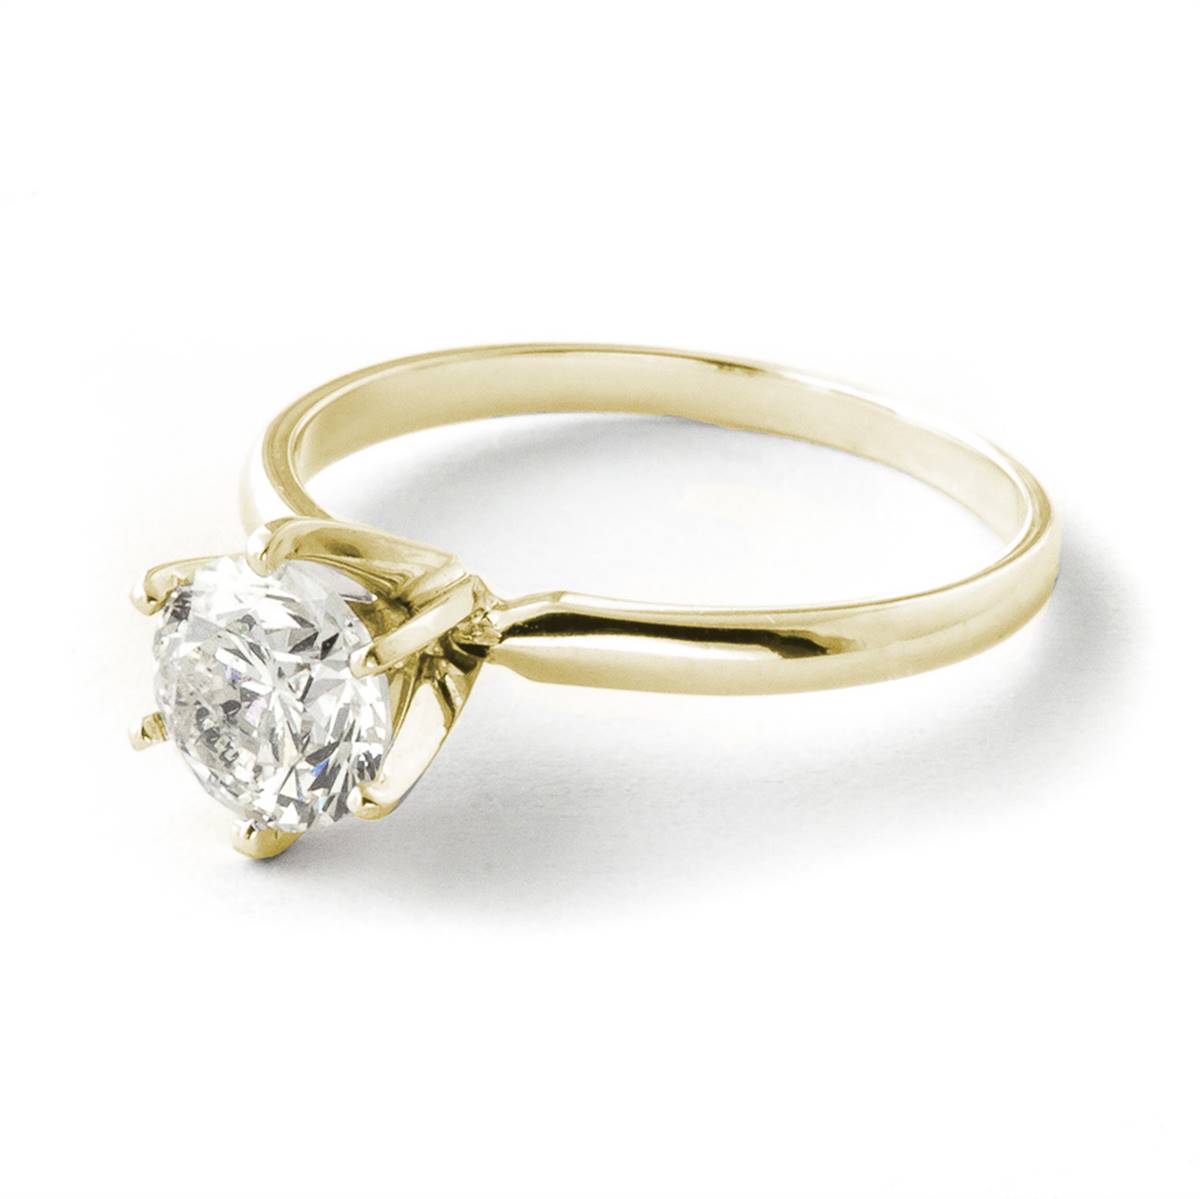 1 Carat 14K Solid Yellow Gold Solitaire Ring 1.0 Carat Si3, F-g Color Natural Diamond